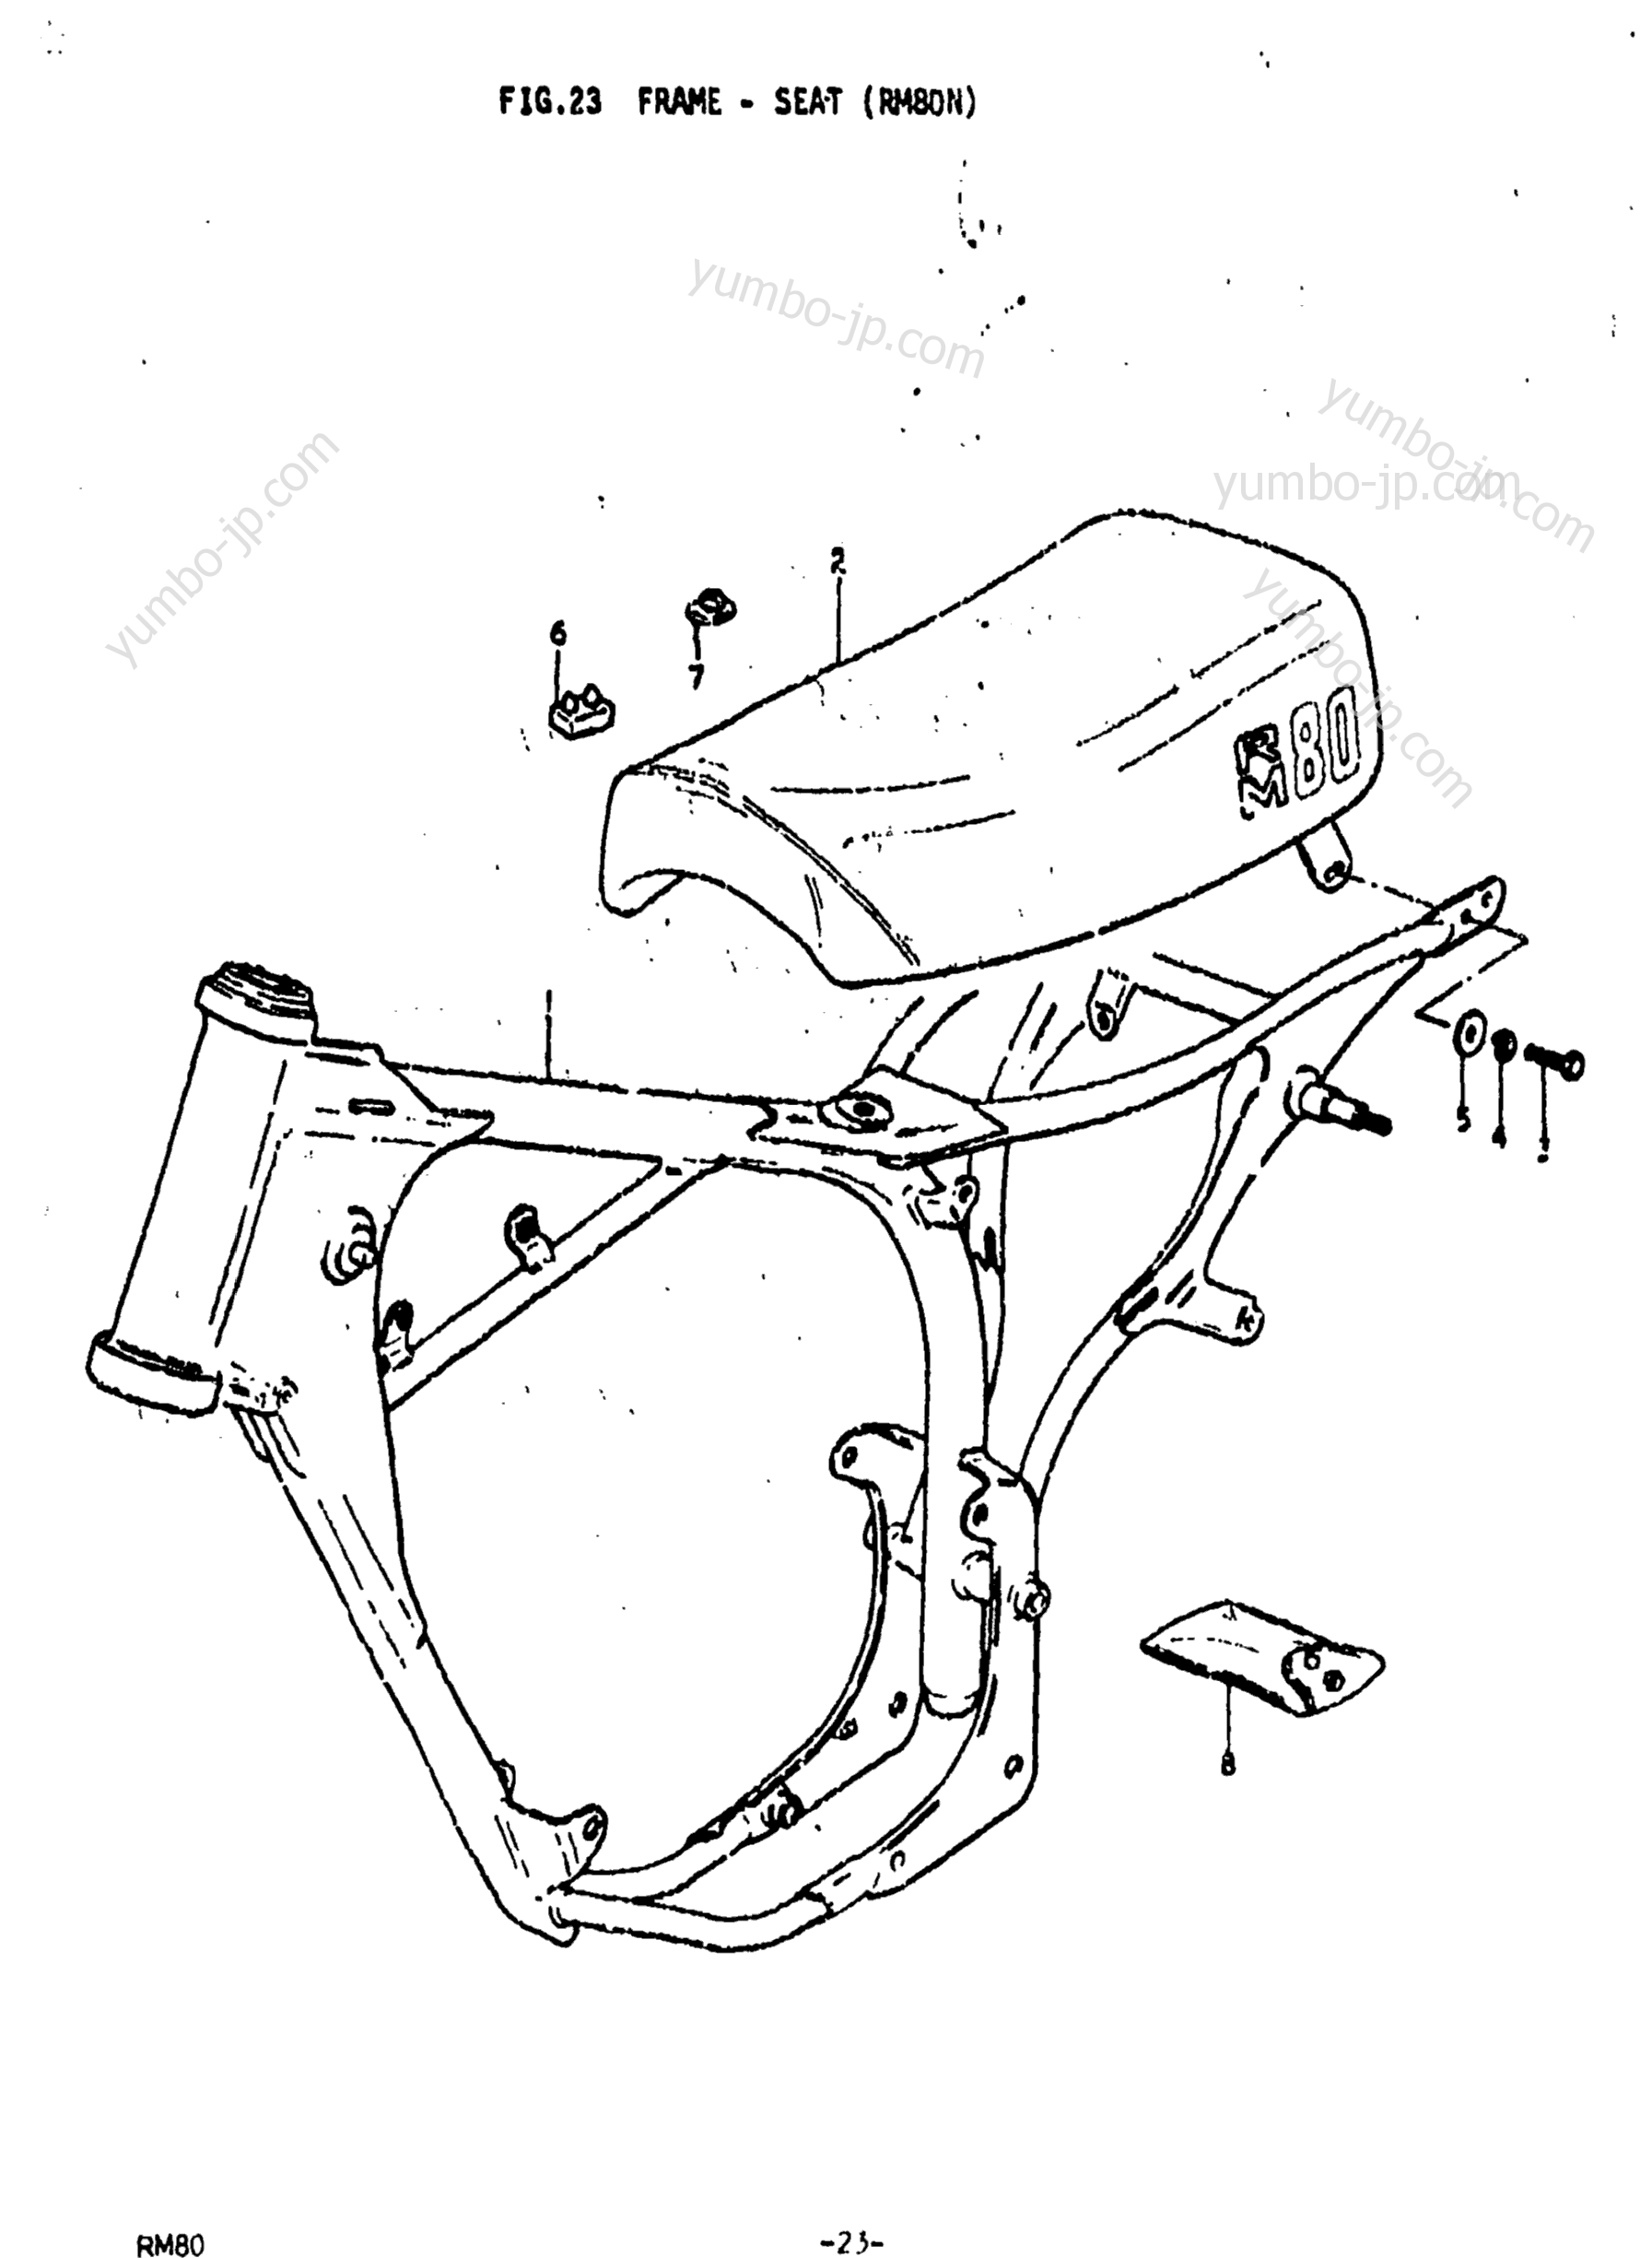 FRAME - SEAT (RM80N) for motorcycles SUZUKI RM80 1979 year